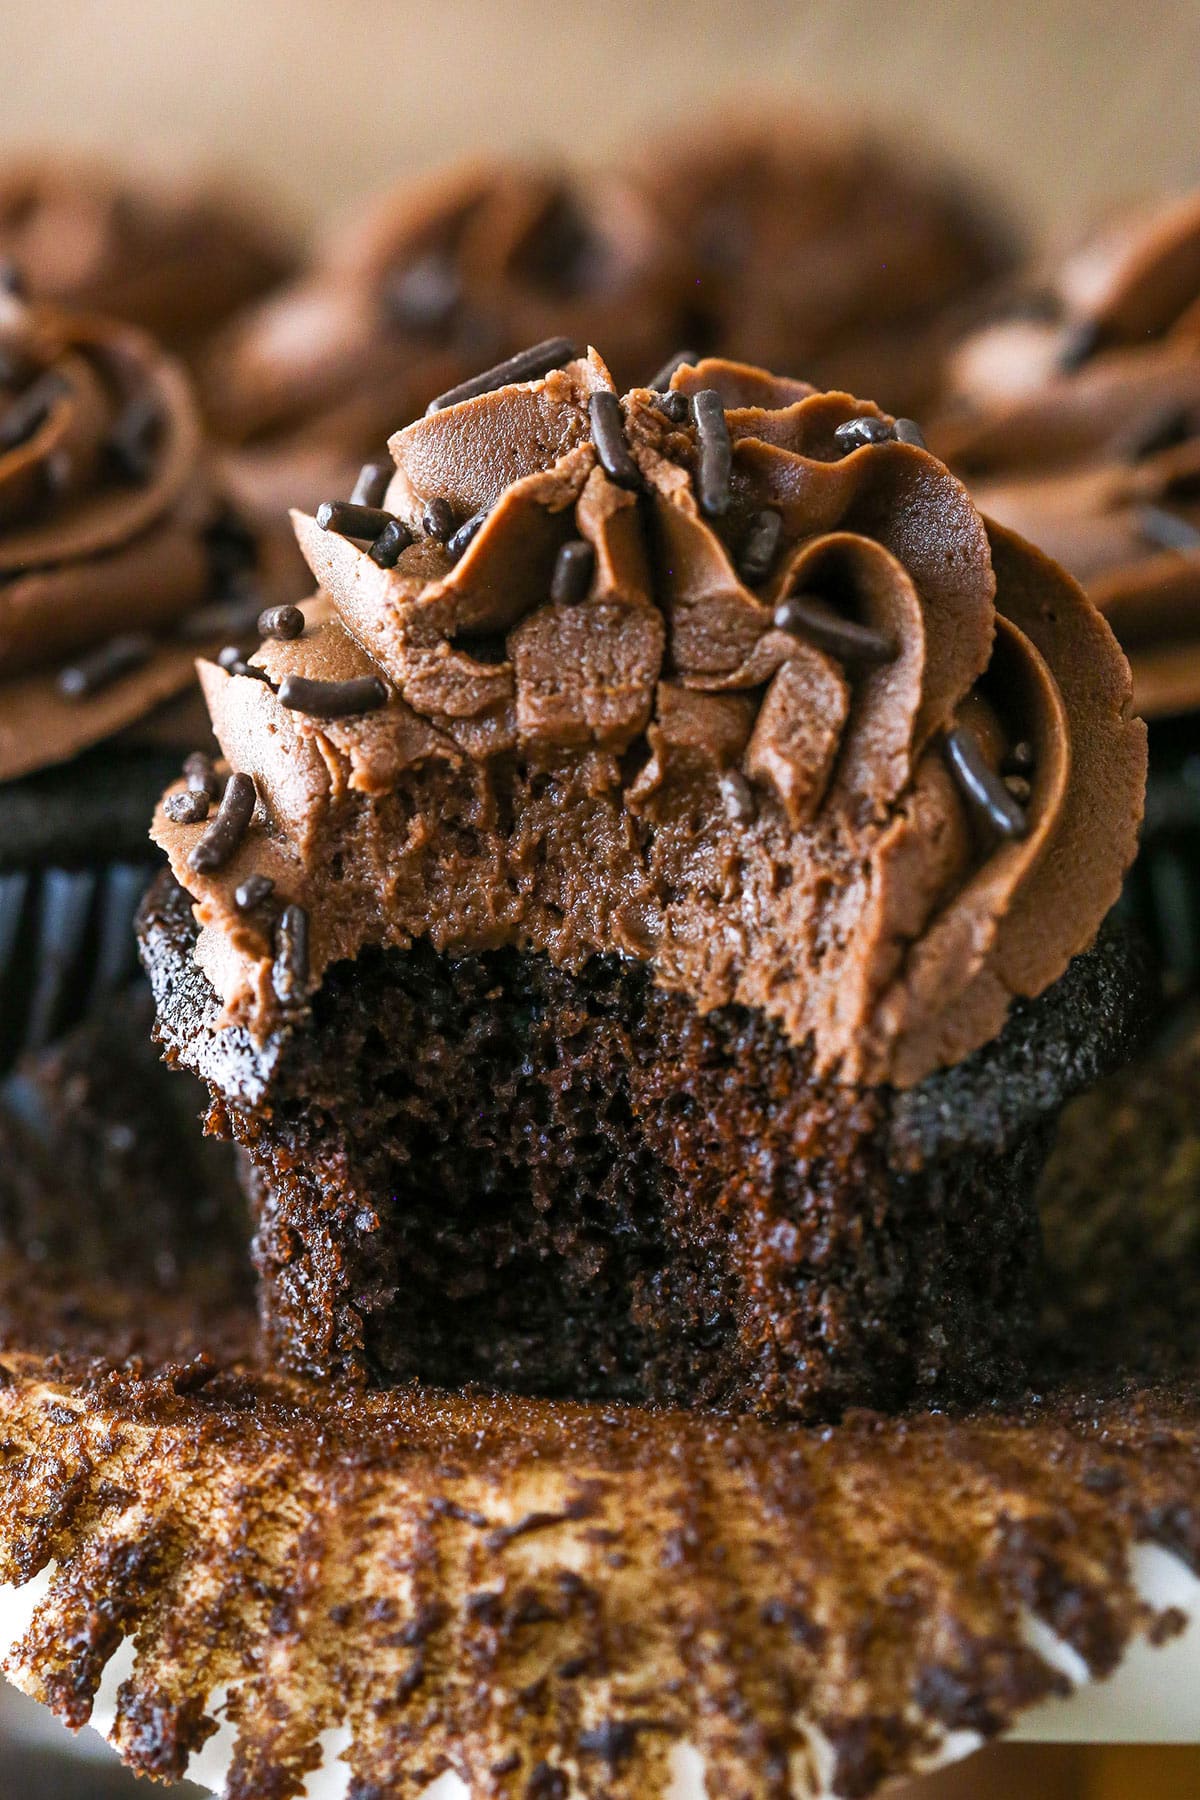 A moist chocolate cupcake with a bite taken out of it alongside other chocolate cupcakes on a cake stand.